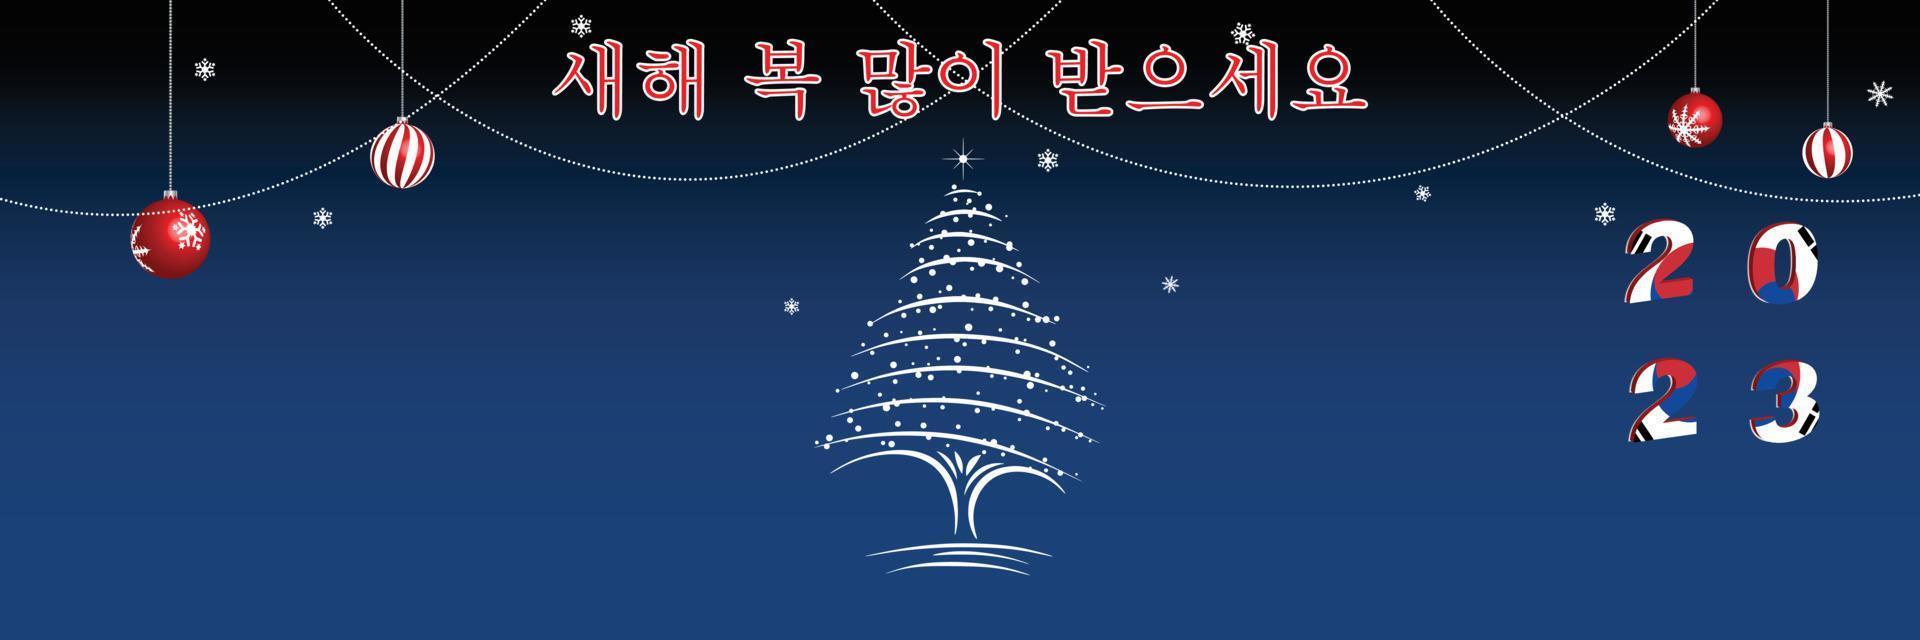 Merry Christmas and Happy New Year web page cover. South Korea flag on the year 2023. Holiday design for greeting card, banner, celebration poster, party invitation. Vector illustration.